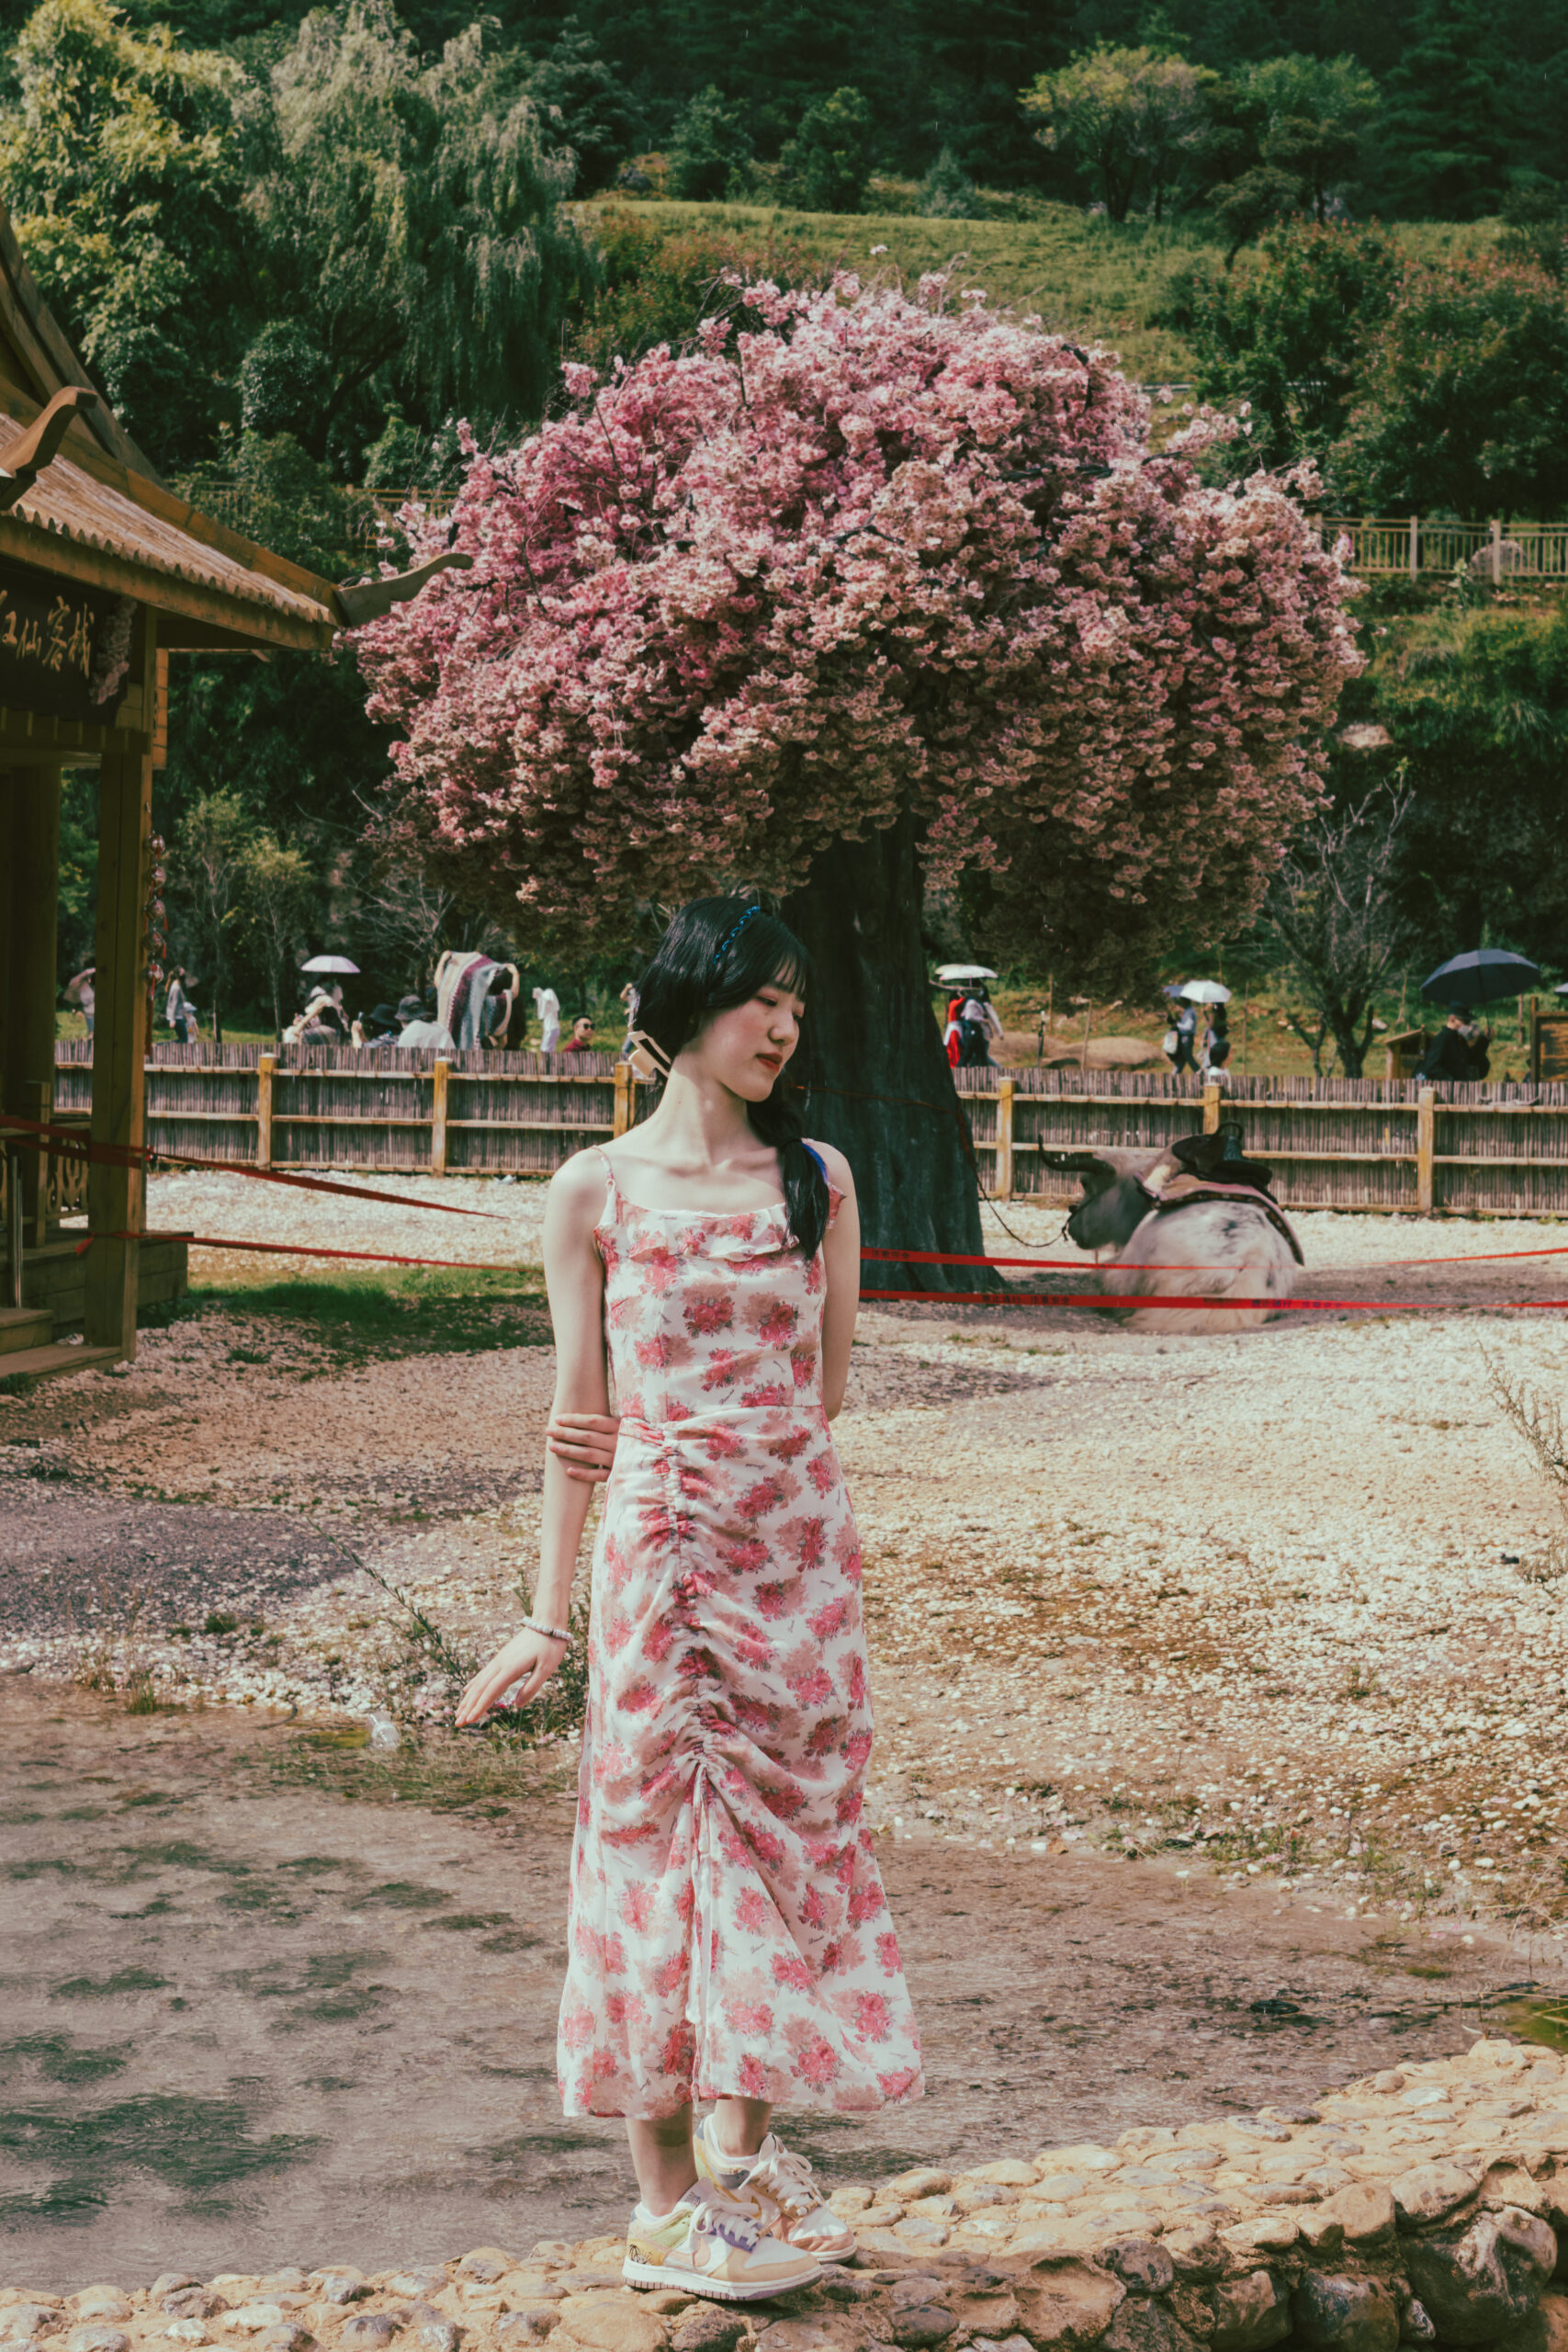 A person in a dress standing in front of a tree.